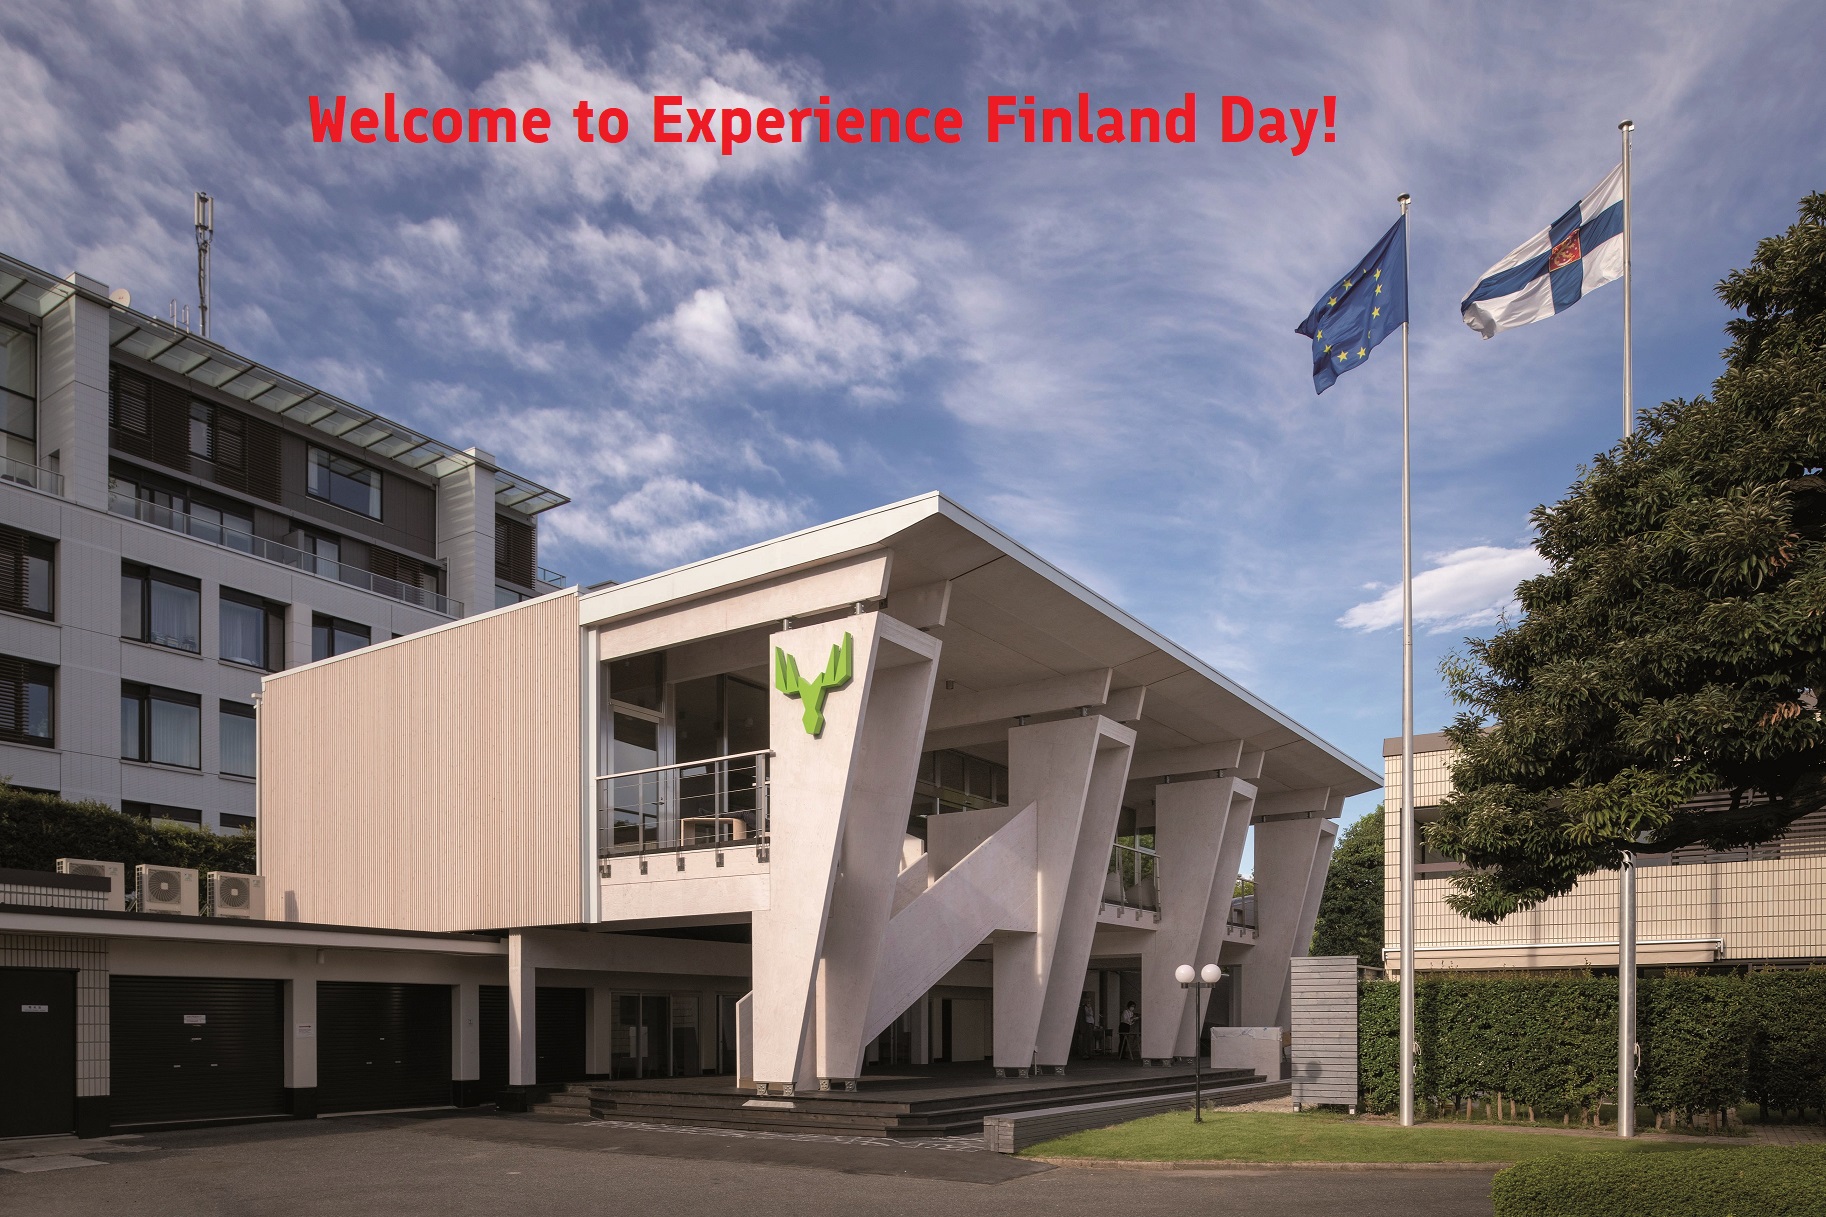 Come and enjoy “Experience Finland” day at Metsä Pavilion on 23 November -  Suomi ulkomailla: Japani